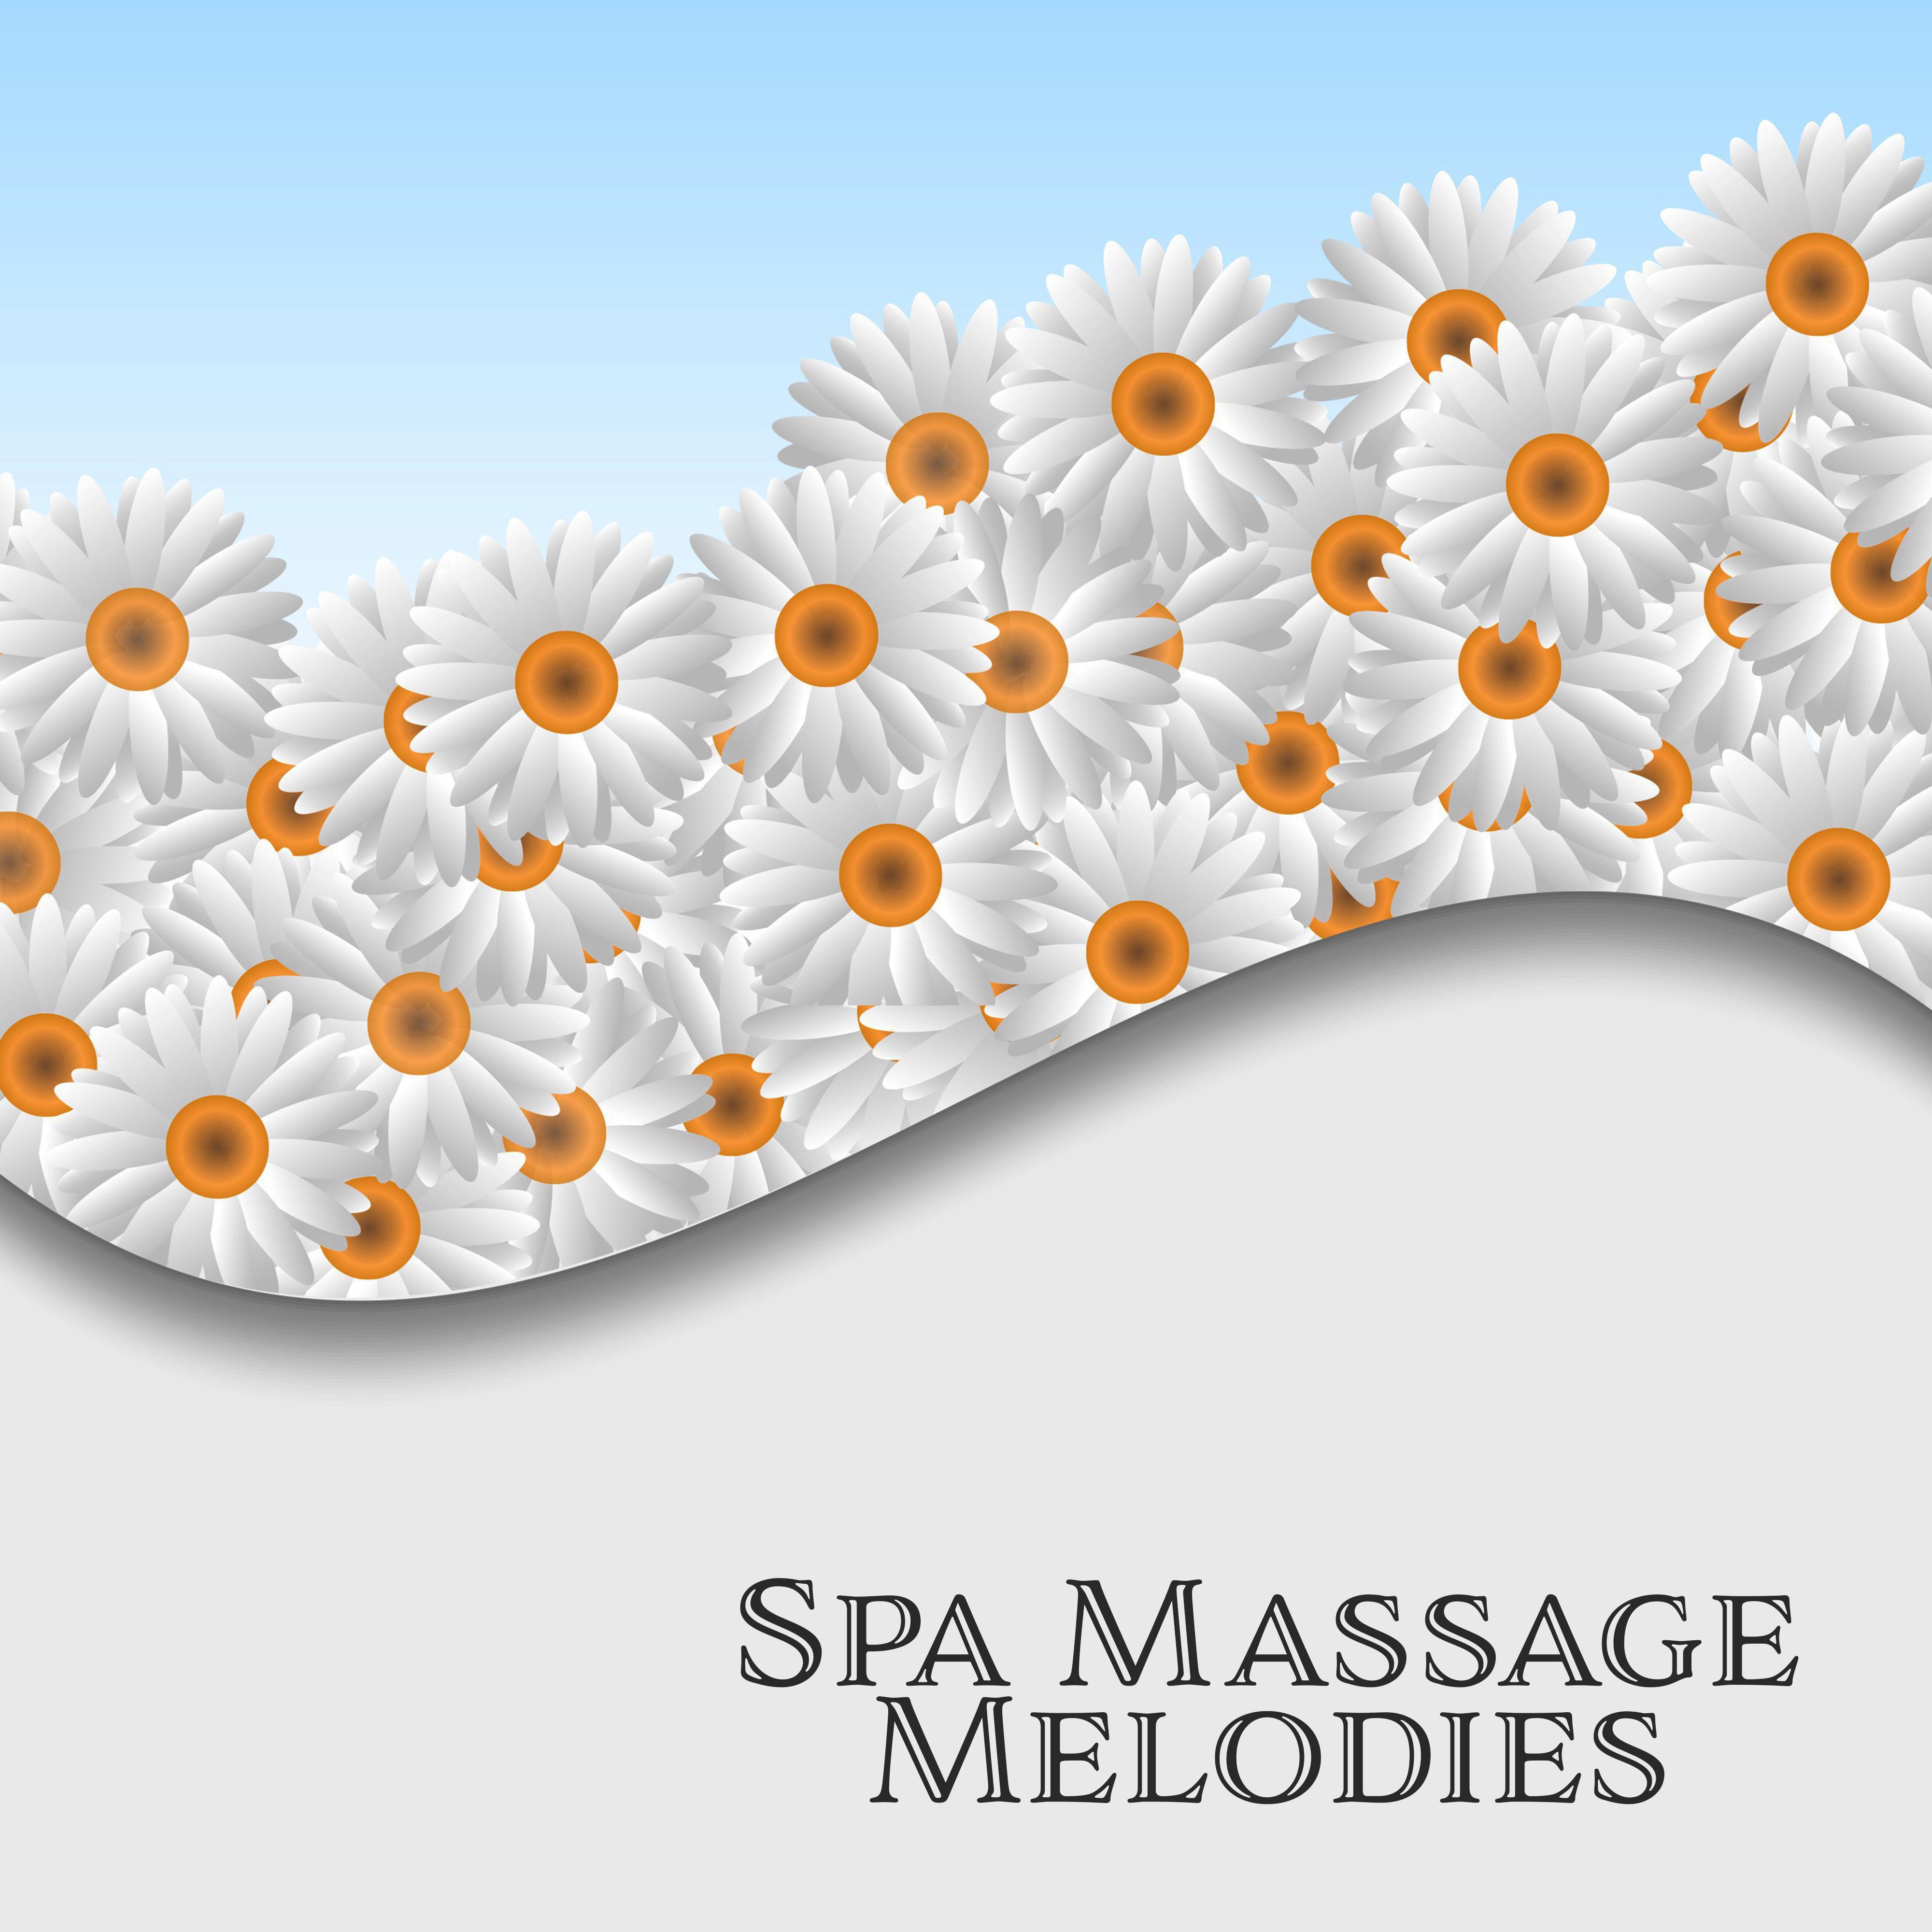 Spa Massage Melodies – Chilled Melodies, New Age Songs to Relax, Calming Sounds, Music to Relax